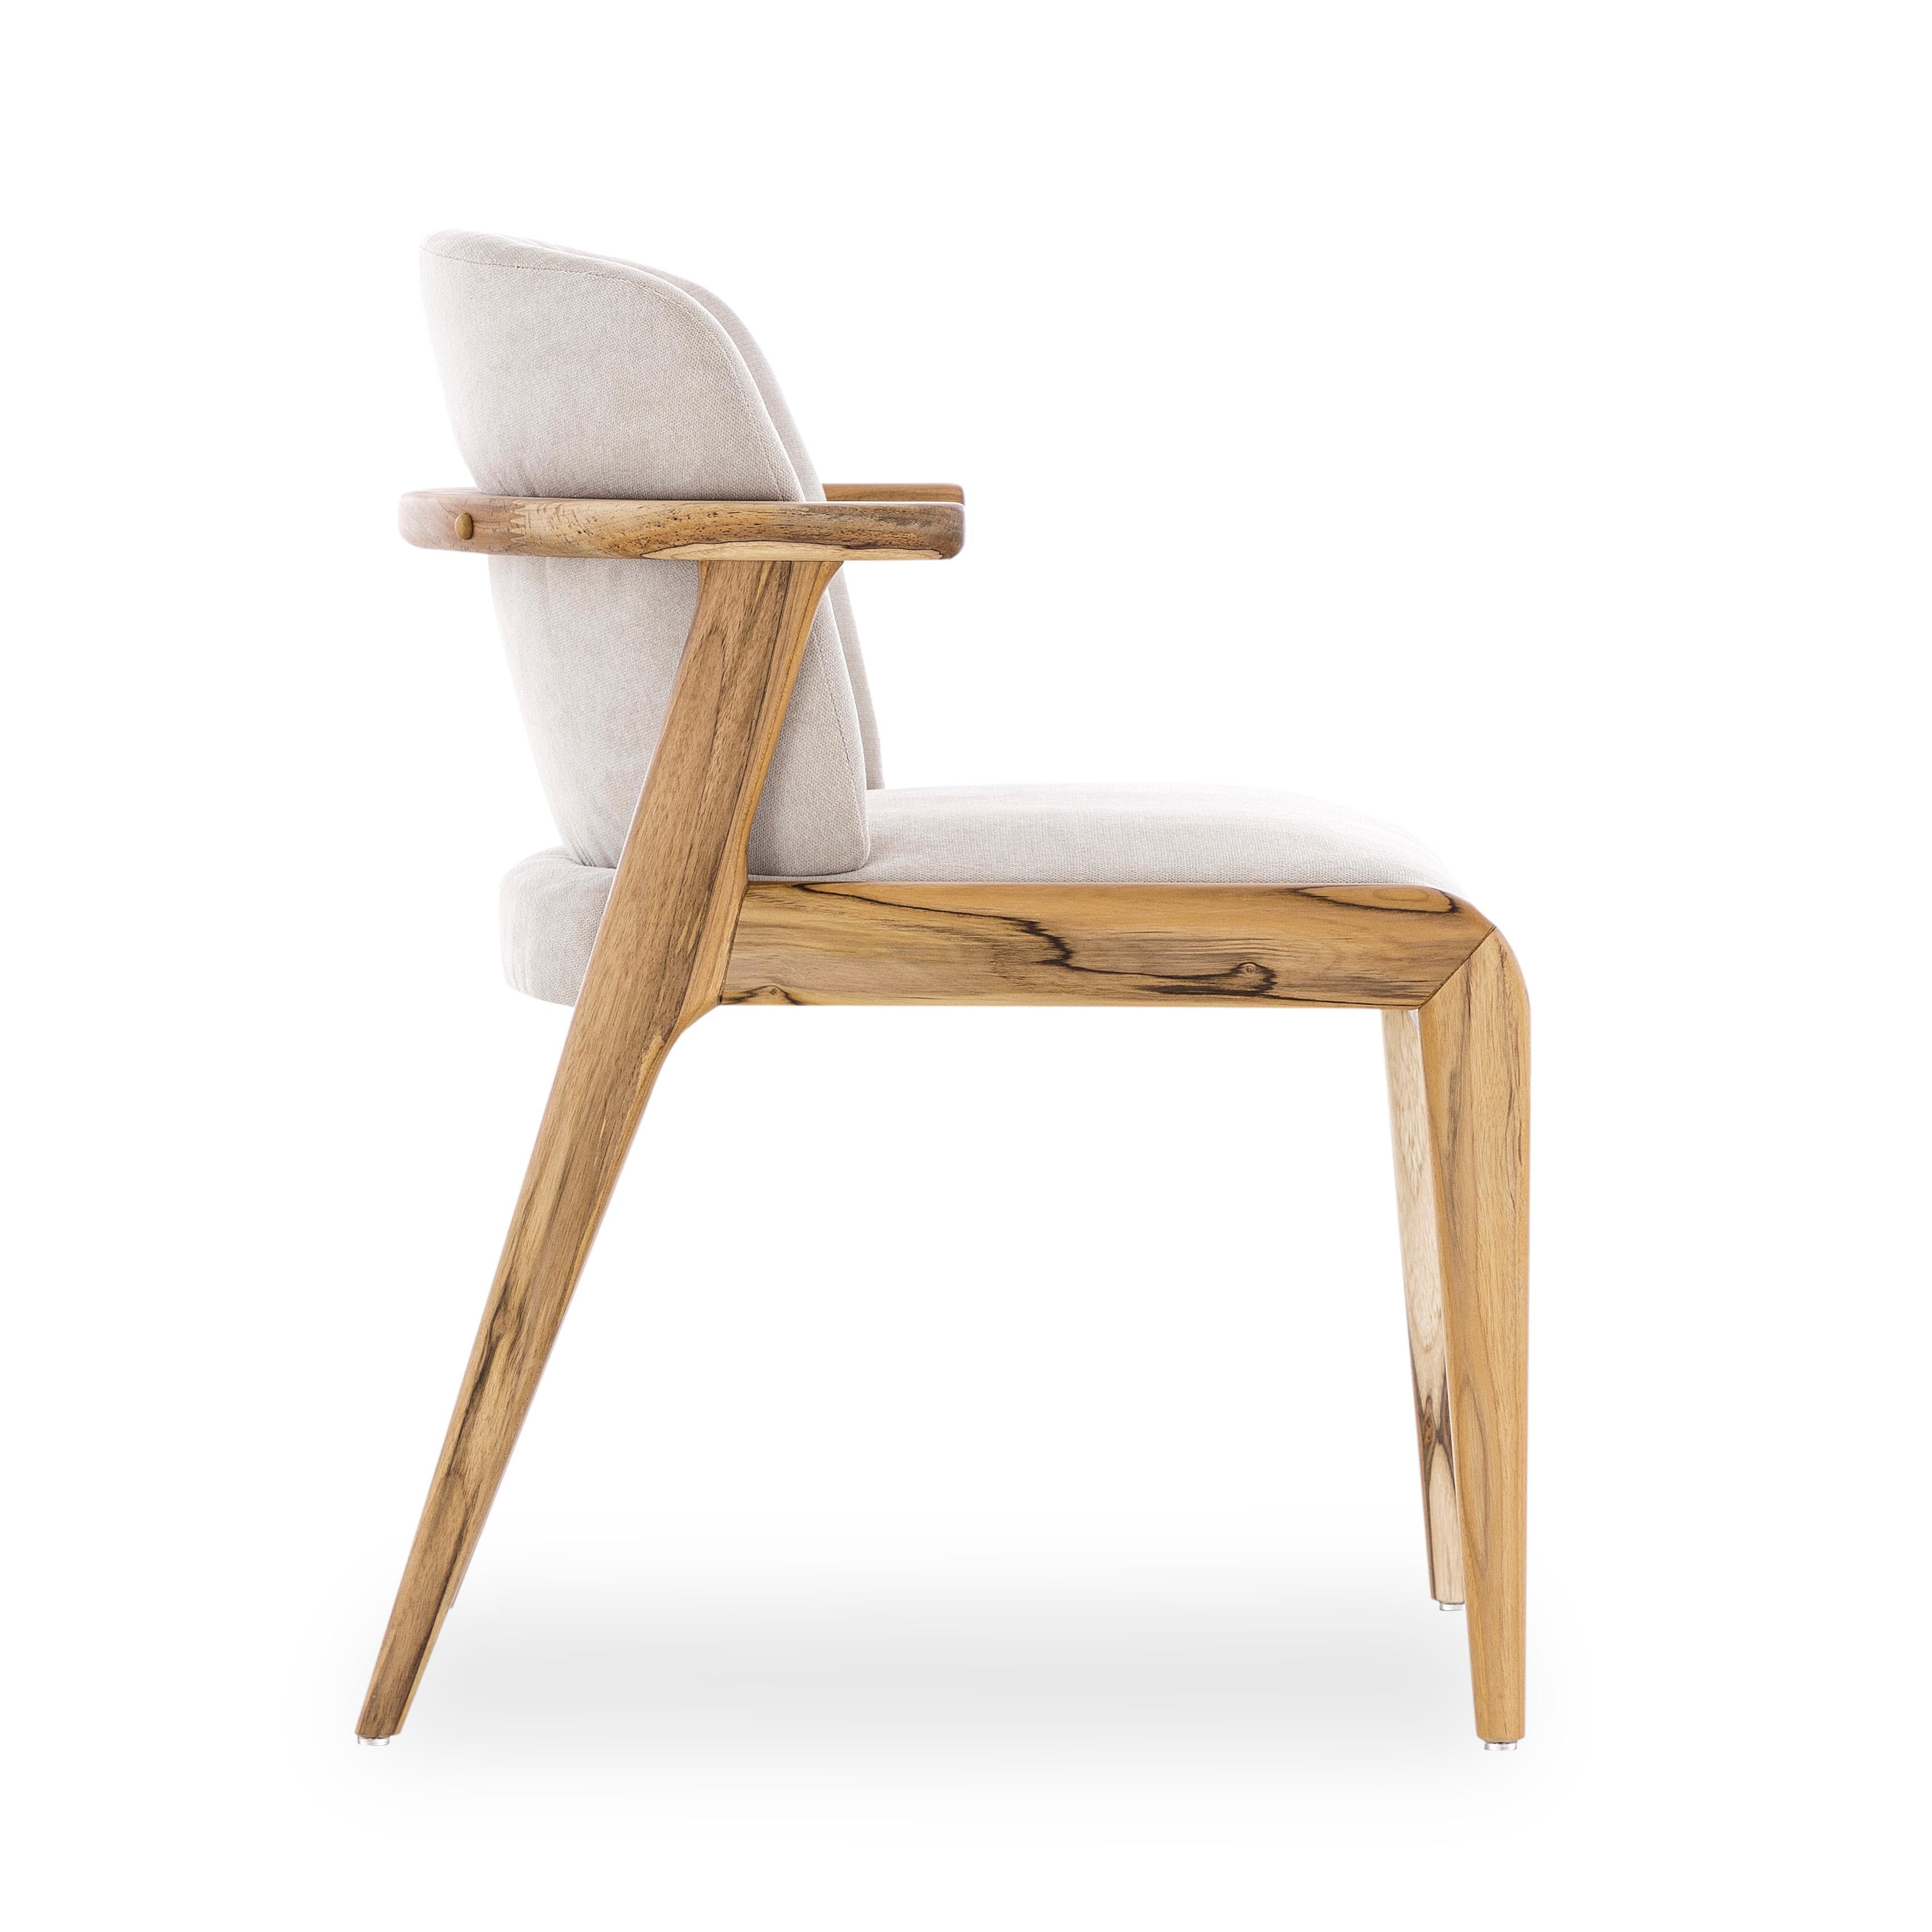 The creative team at Uultis created this dining room chair to embellish that family space with a frame and legs that are made of wood in a teak finish, combining it with a beige cotton beautiful fabric. It is a chair designed to provide comfort and